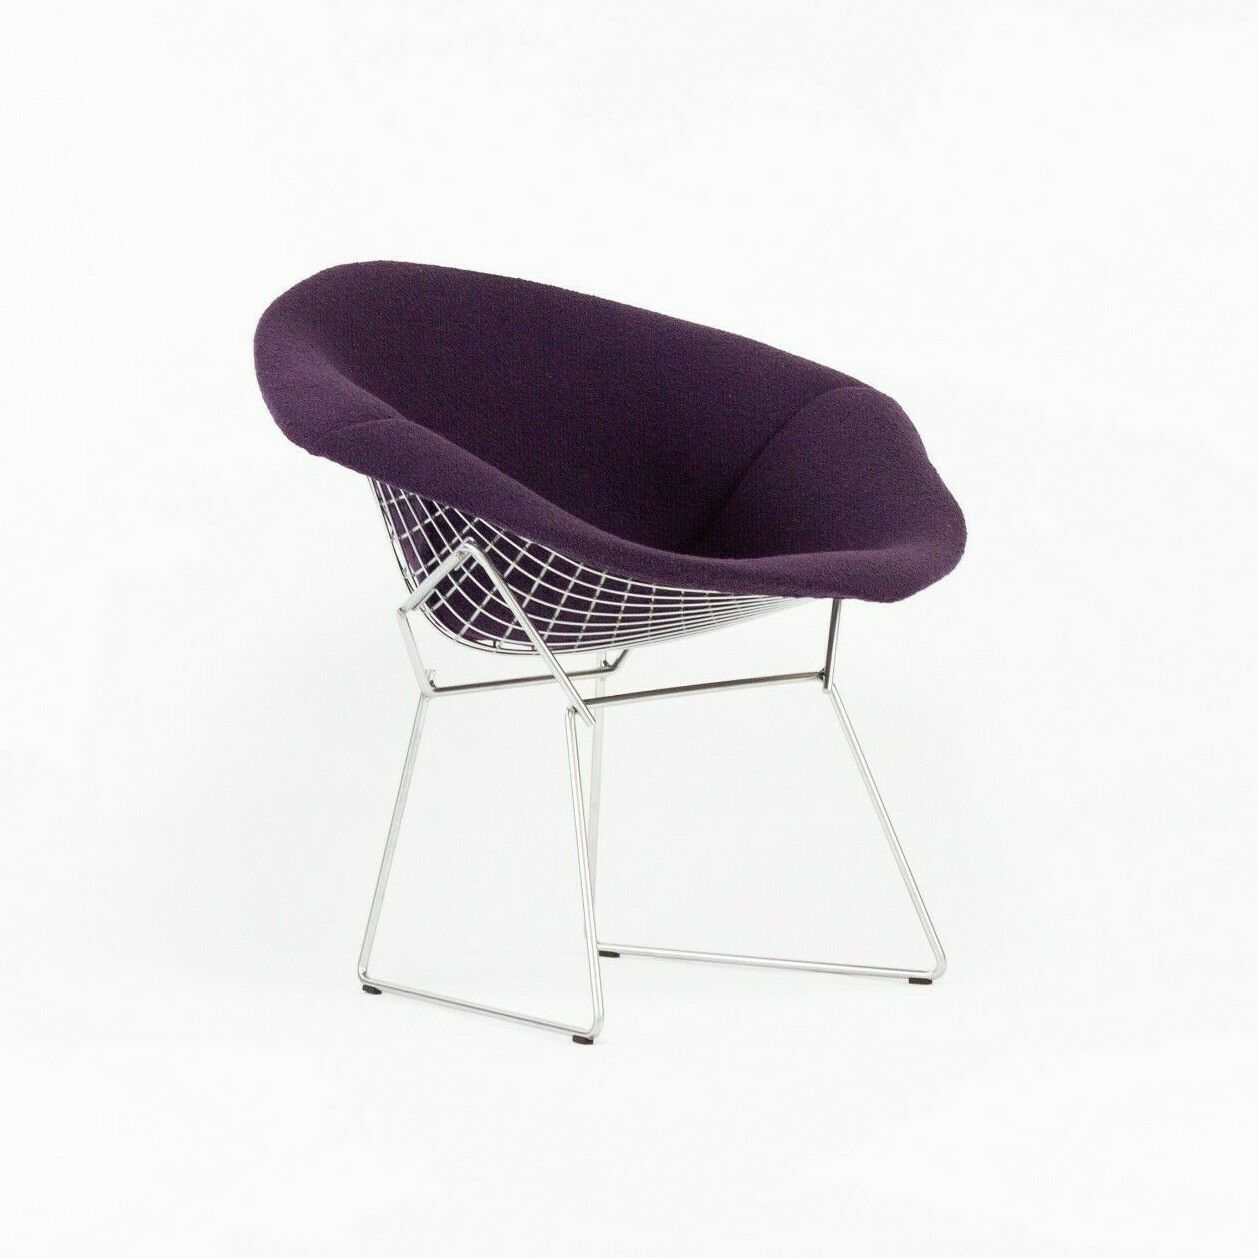 2021 Harry Bertoia for Knoll Diamond Chair with Full Iris Purple Boucle Cover